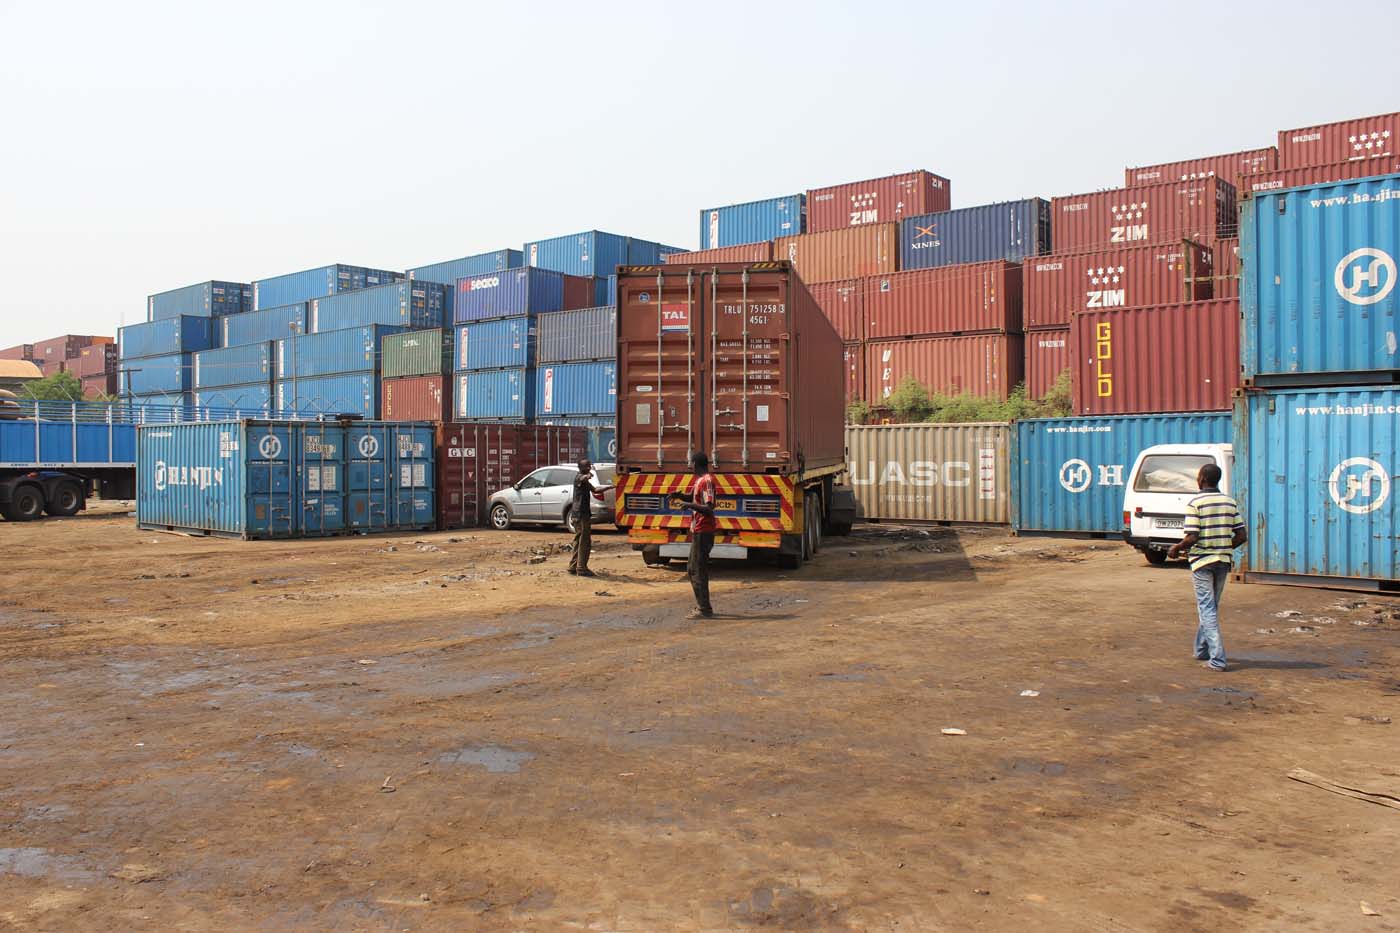 Selecting a shipping container at the port